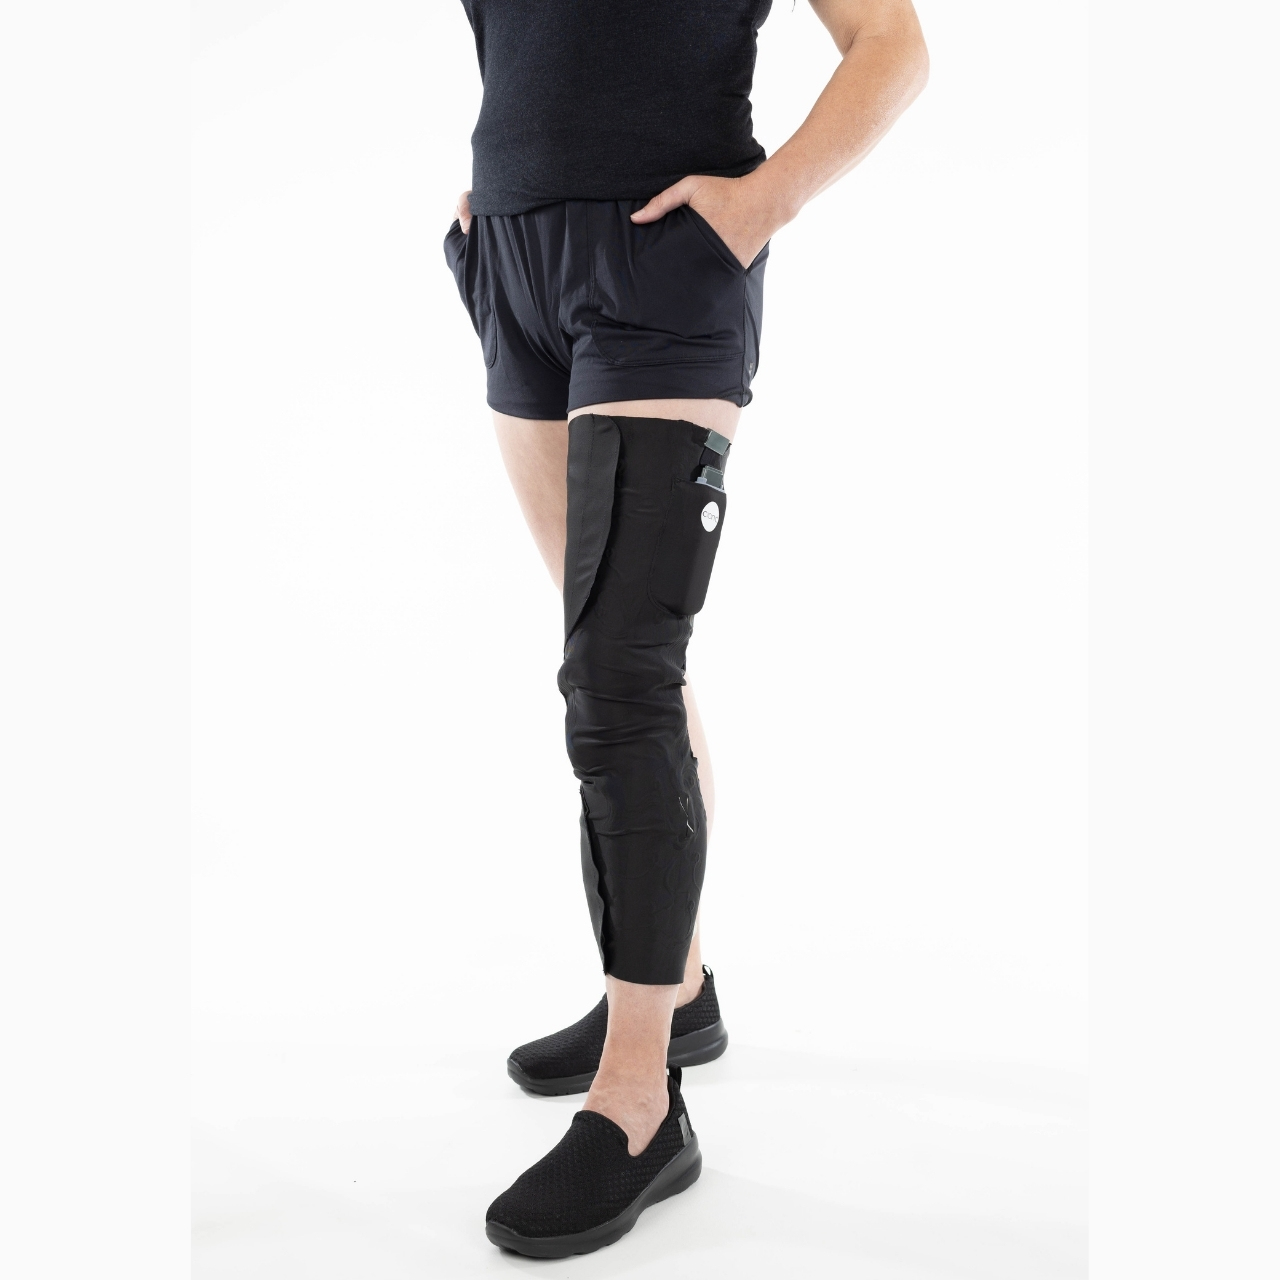 Fuseproject’s bionic leg wearable improves lives of those living with ...